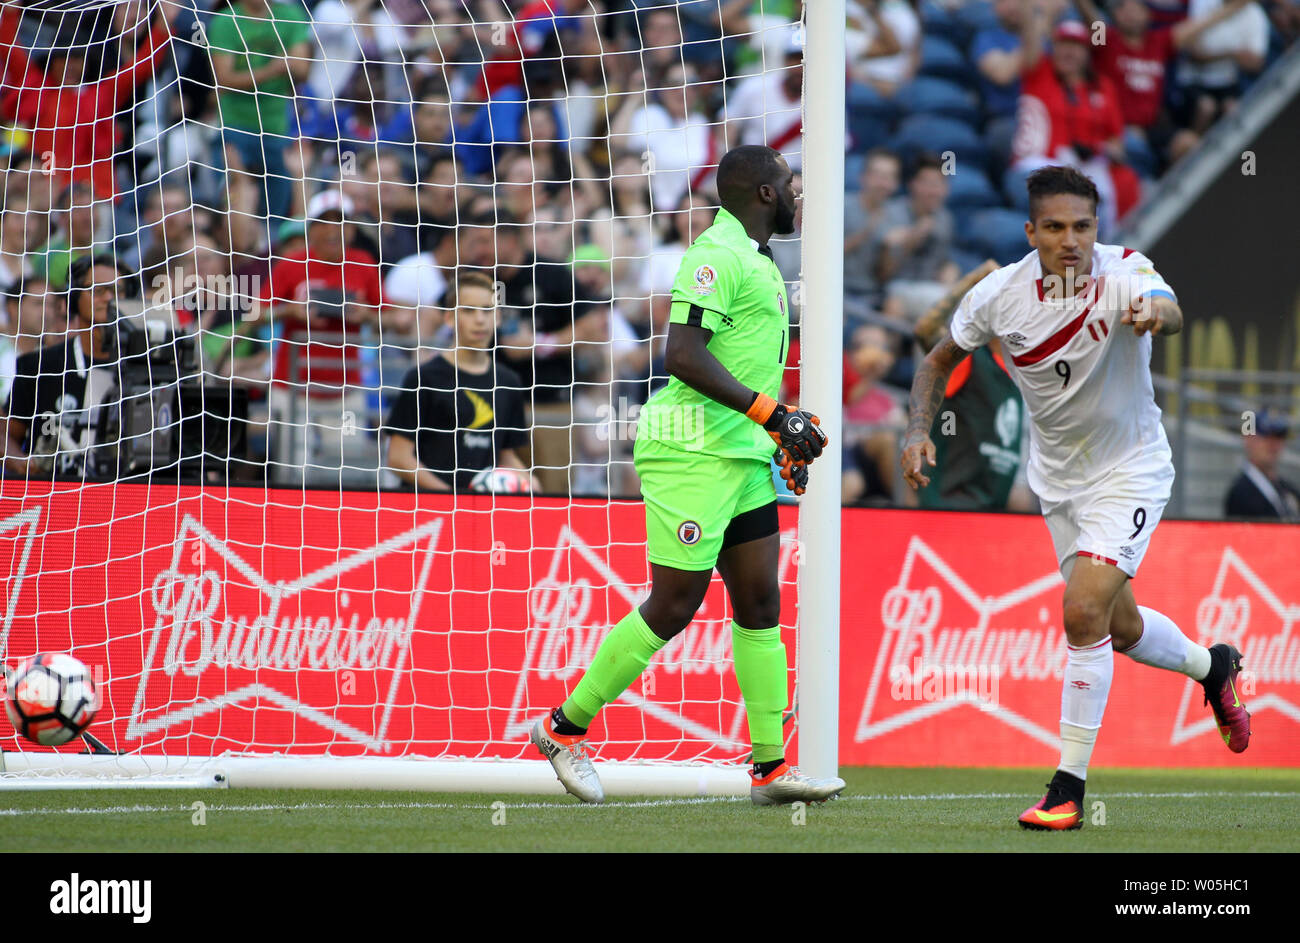 Peru's Paolo Guerrero (9) runs past Haiti's goalie Johny Placide (1) after scoring a goal during the second half in a 2016 Copa America Centenario soccer match at CenturyLink Field in Seattle, Washington on June 4, 2016.  Peru beat Haiti- 1-0. Photo by Jim Bryant/ UPI Stock Photo